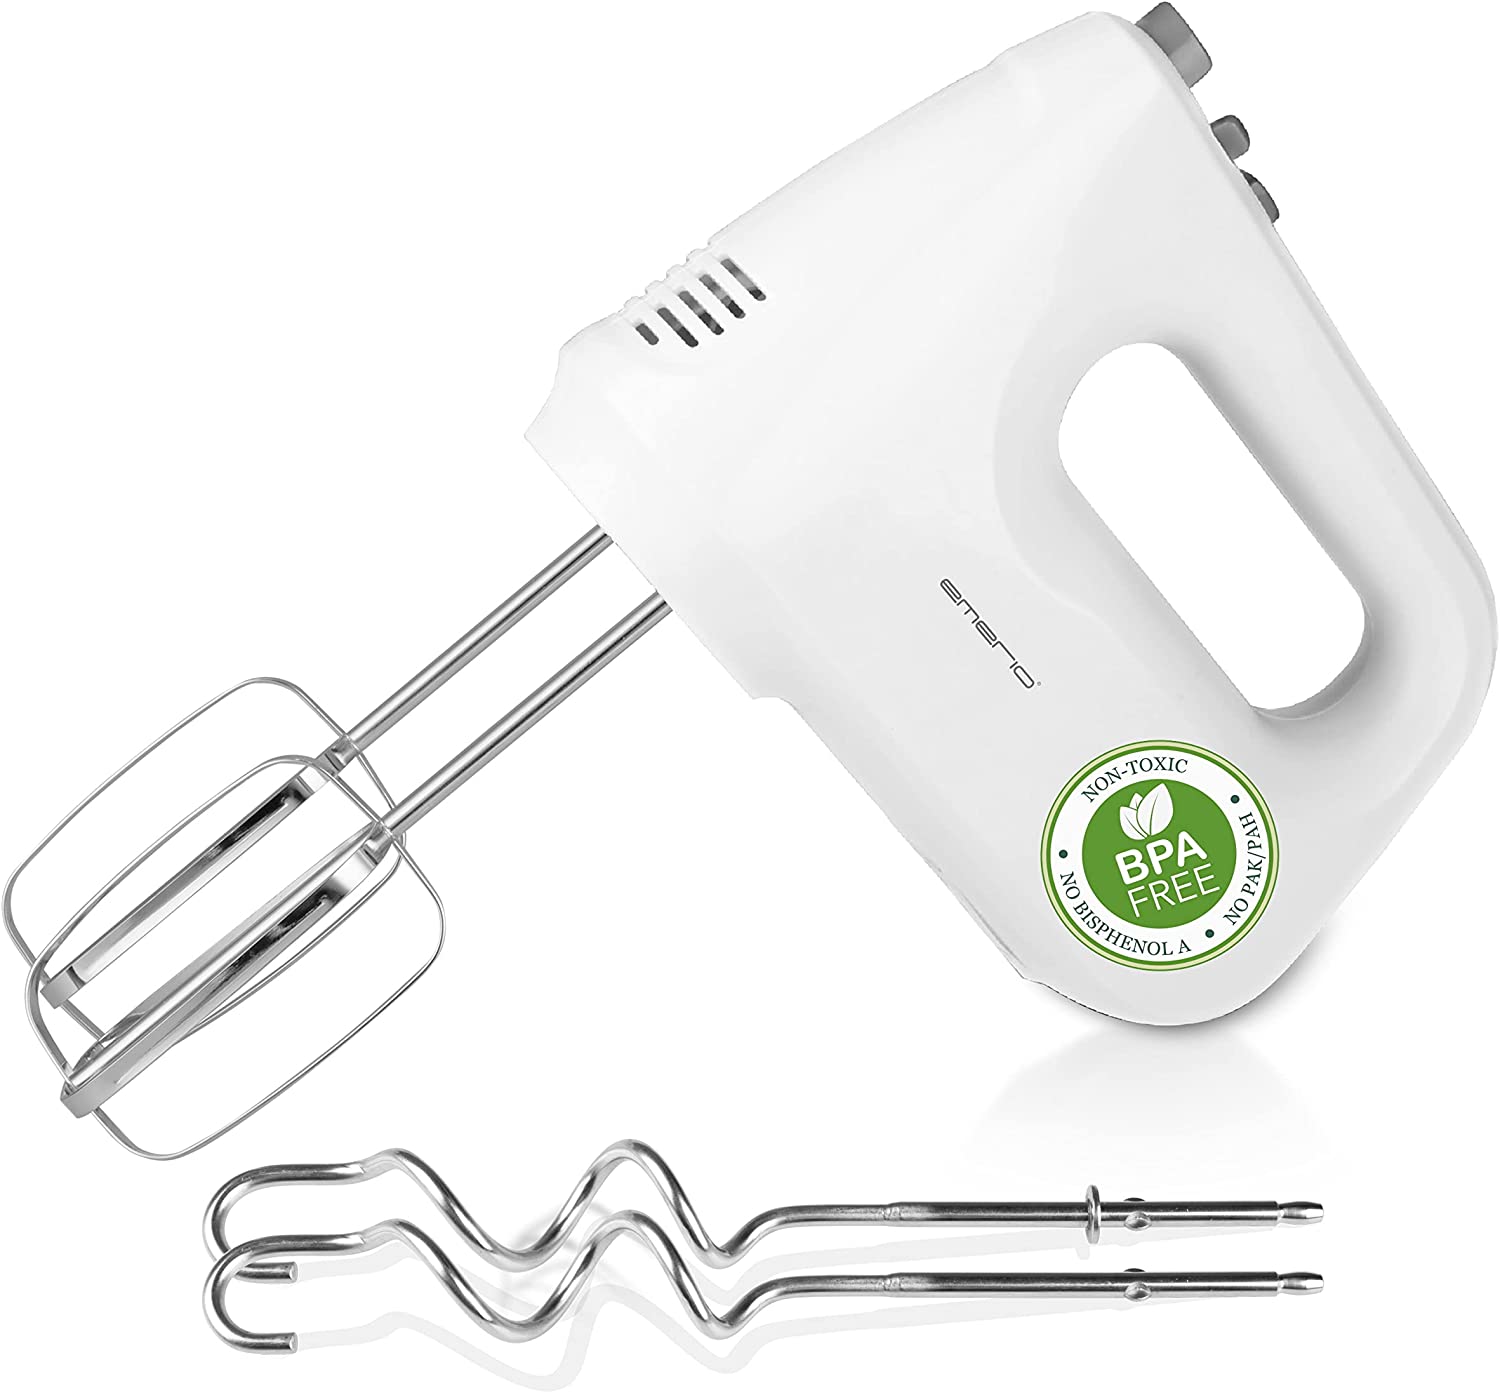 Emerio HM-124178 Electric Hand Mixer with 6 Speeds and Turbo Button